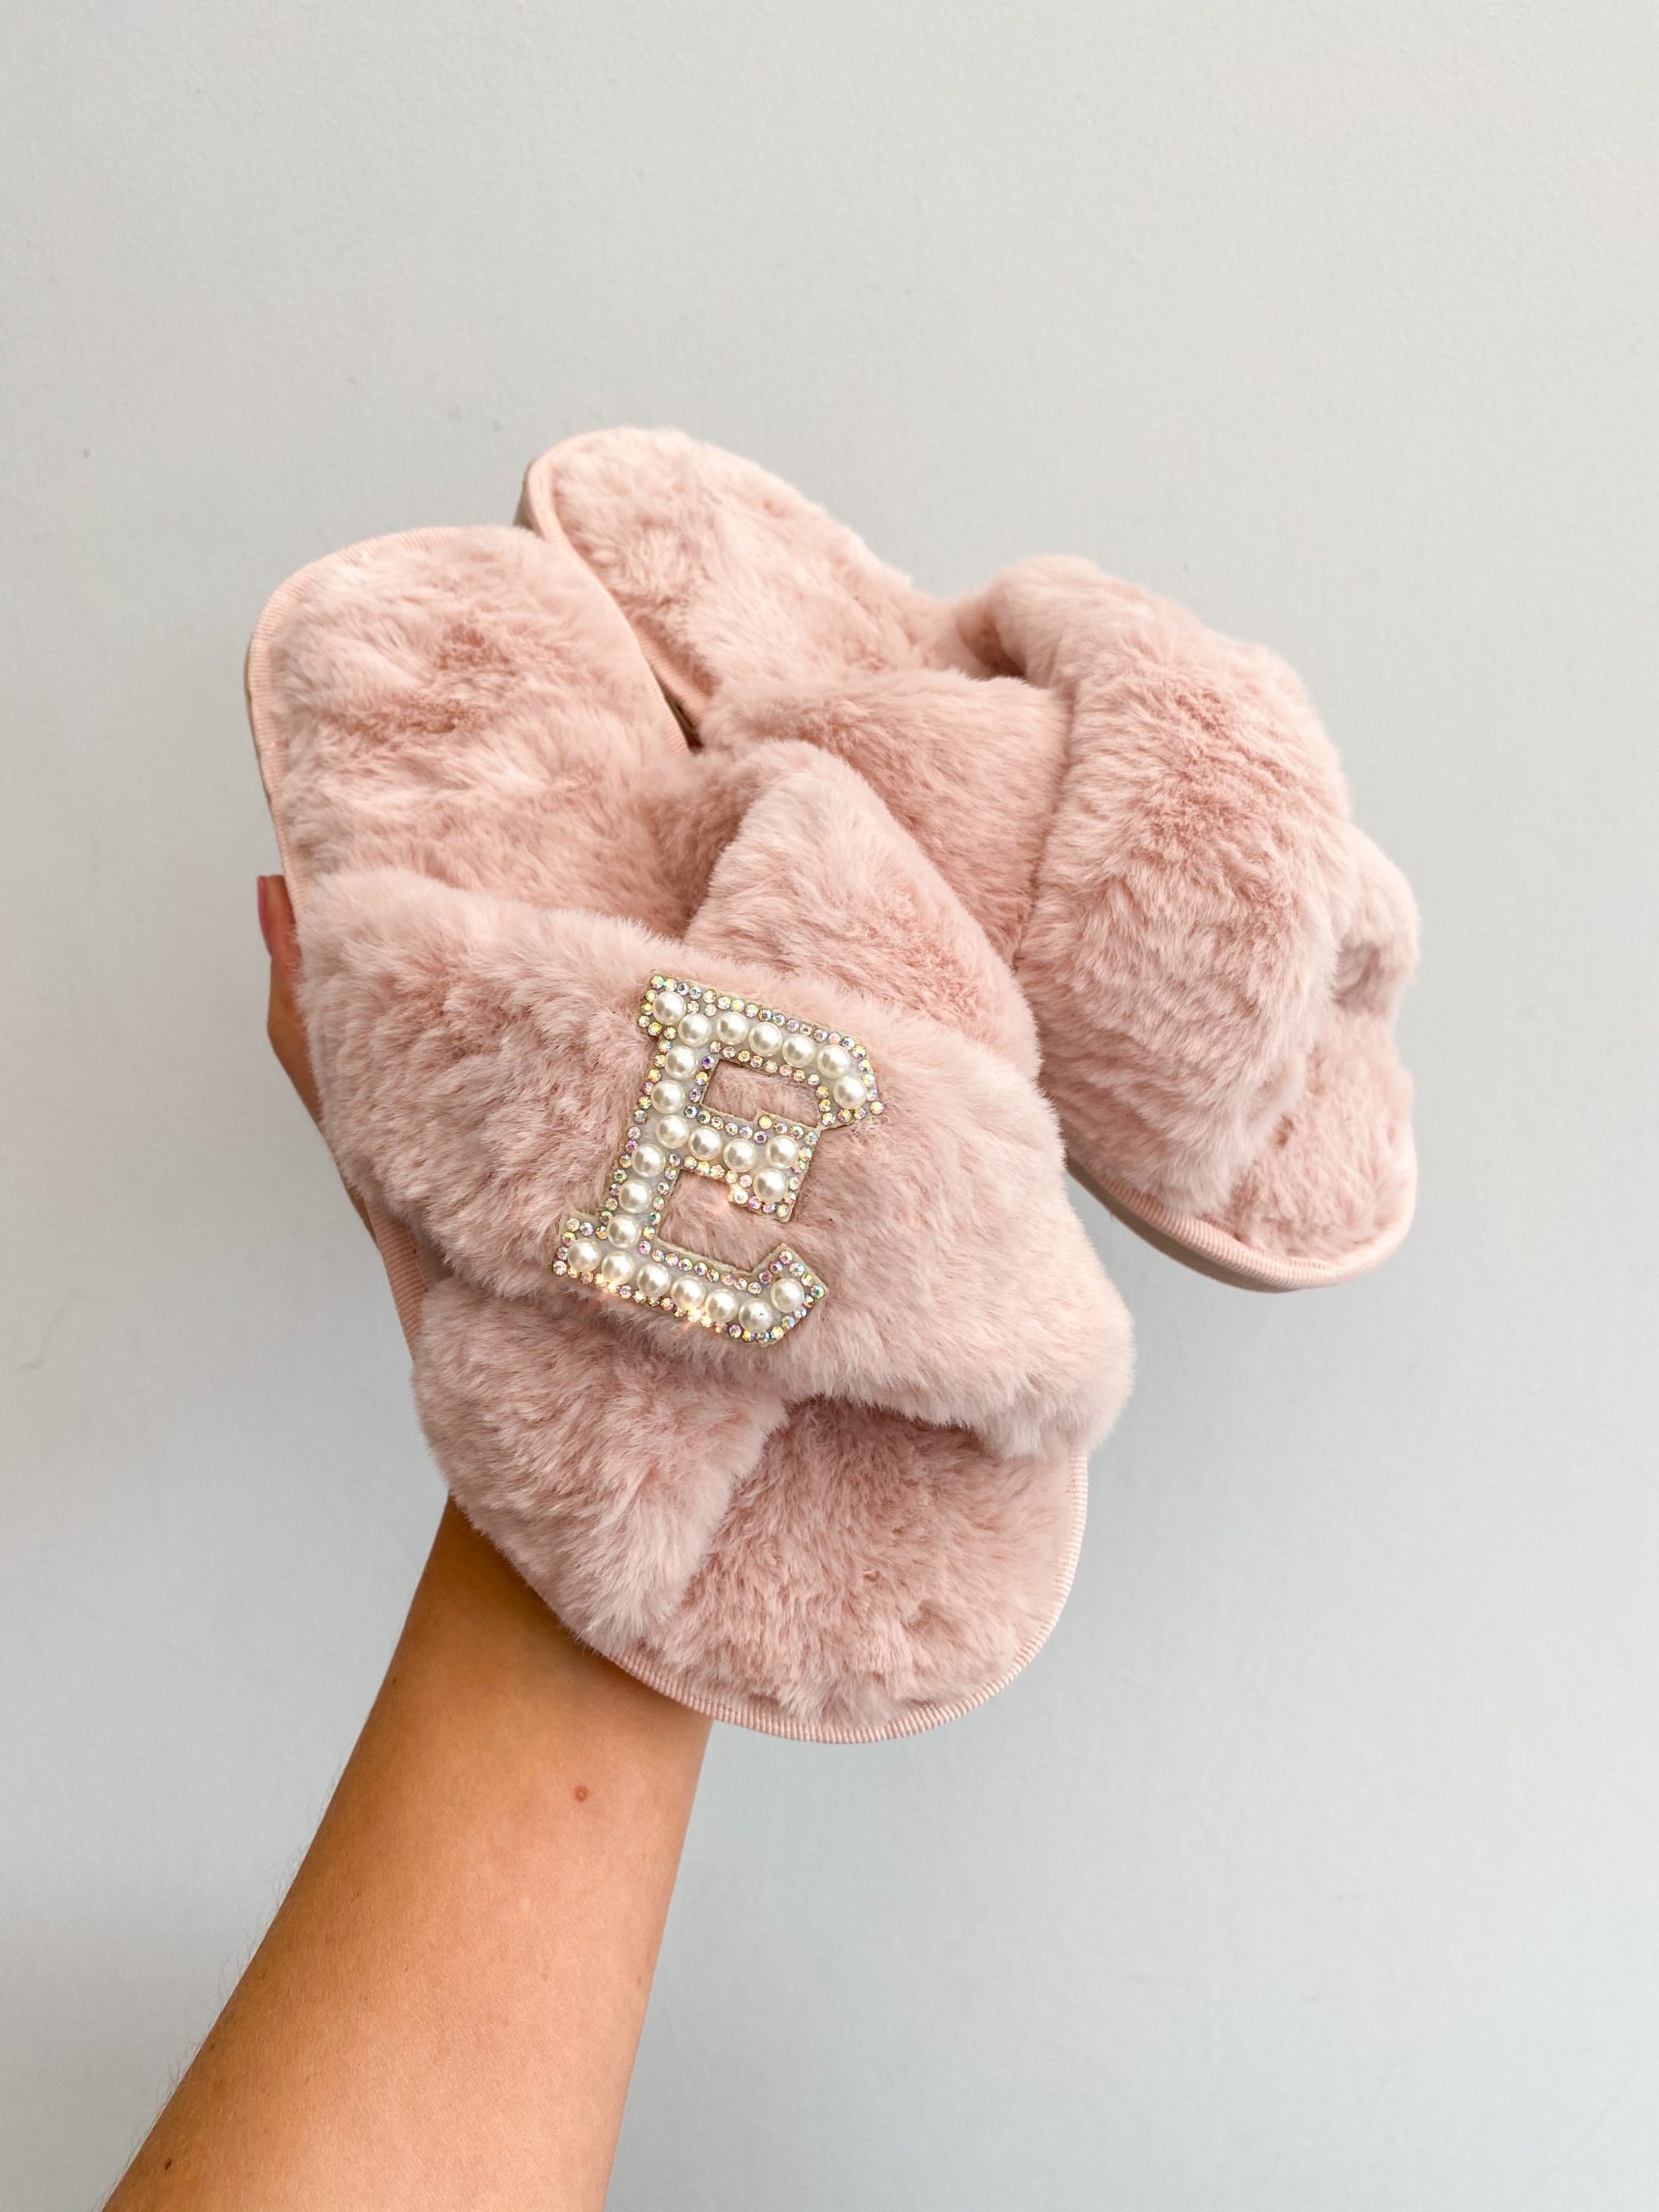 Pink Double Initial Slippers